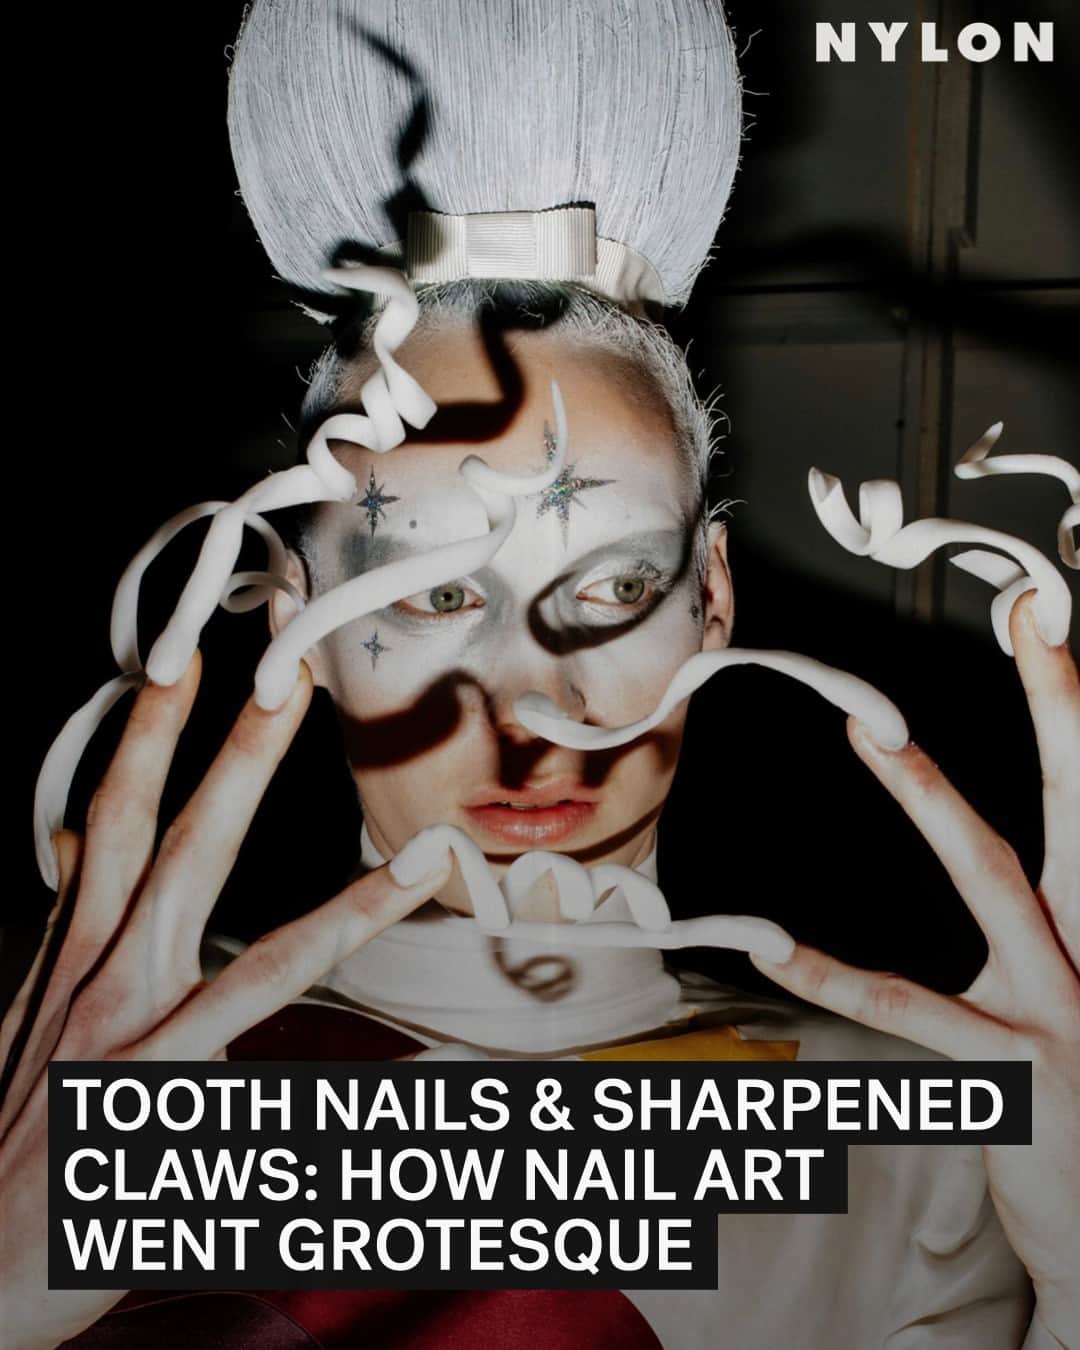 Nylon Magazineのインスタグラム：「Recently, we’ve seen “ugly” fashion trends turn into even uglier beauty trends... and it seems nails are getting the latest treatment now. From tooth-like manicures to sharpened claws to designs with animal bones, @laurapitcher dives into the growing grotesque and surreal nail art world — and the nail artists behind it. Link in bio.」